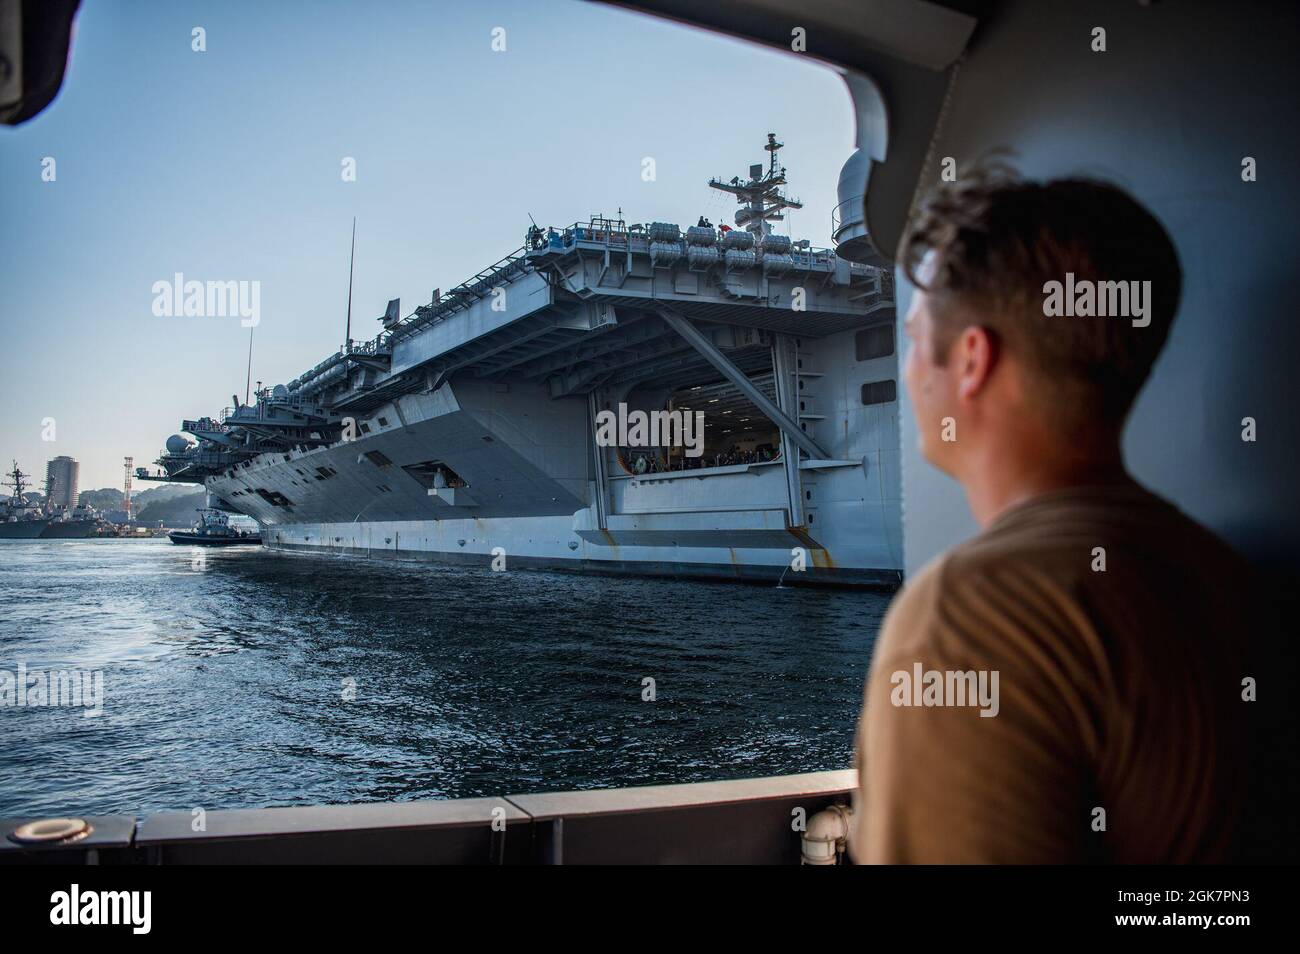 YOKOSUKA, Japan (Aug. 28, 2021) — Hull Maintenance Technician 1st Class Andrew Stewart, attached to Commander, Fleet Activities Yokosuka's (CFAY) port operations department, looks out from Yard Tug Seminole (YT-805) at the Nimitz-class aircraft carrier, USS Carl Vinson (CVN 70) while it enters Berth 12 for a scheduled port visit. Carl Vinson, homeported in San Diego, Calif., and the accompanying Carrier Strike Group (CSG 1), are on a rotational deployment in the U.S. 7th Fleet area of operations to enhance interoperability with partners and serve as a ready-response force in support of a free Stock Photo